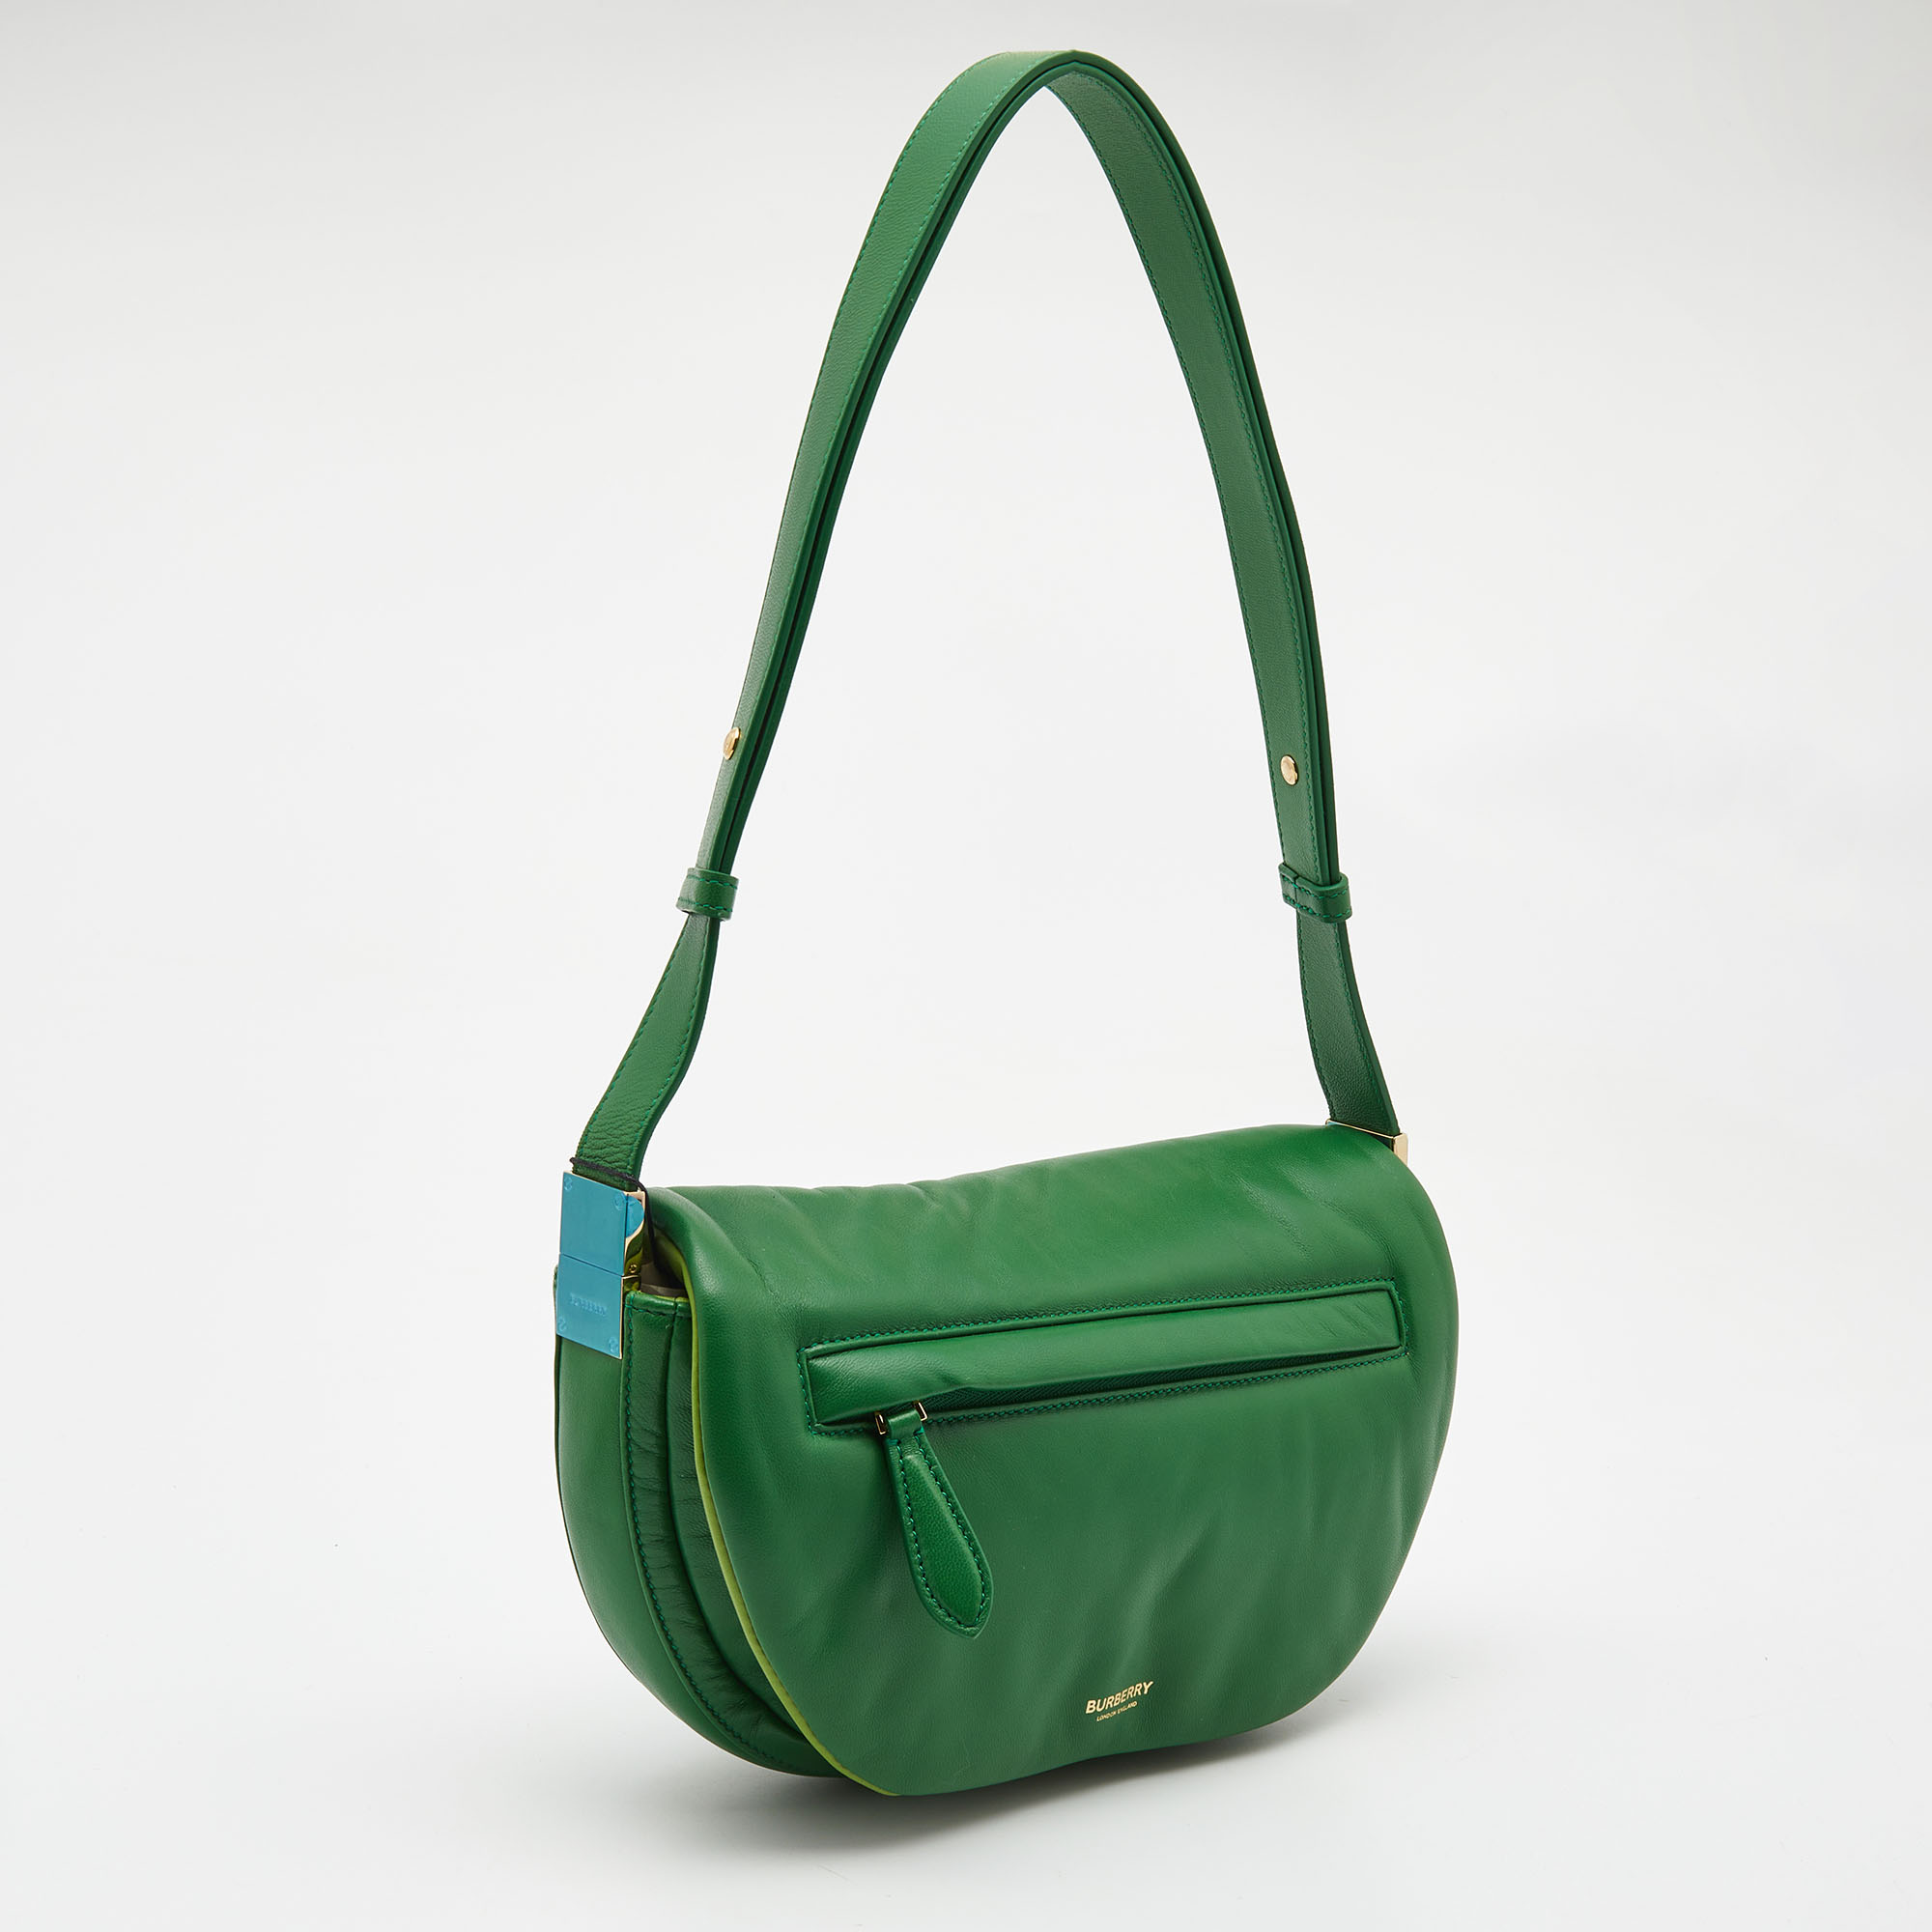 Burberry Two Tone Green Leather Small Olympia Shoulder Bag